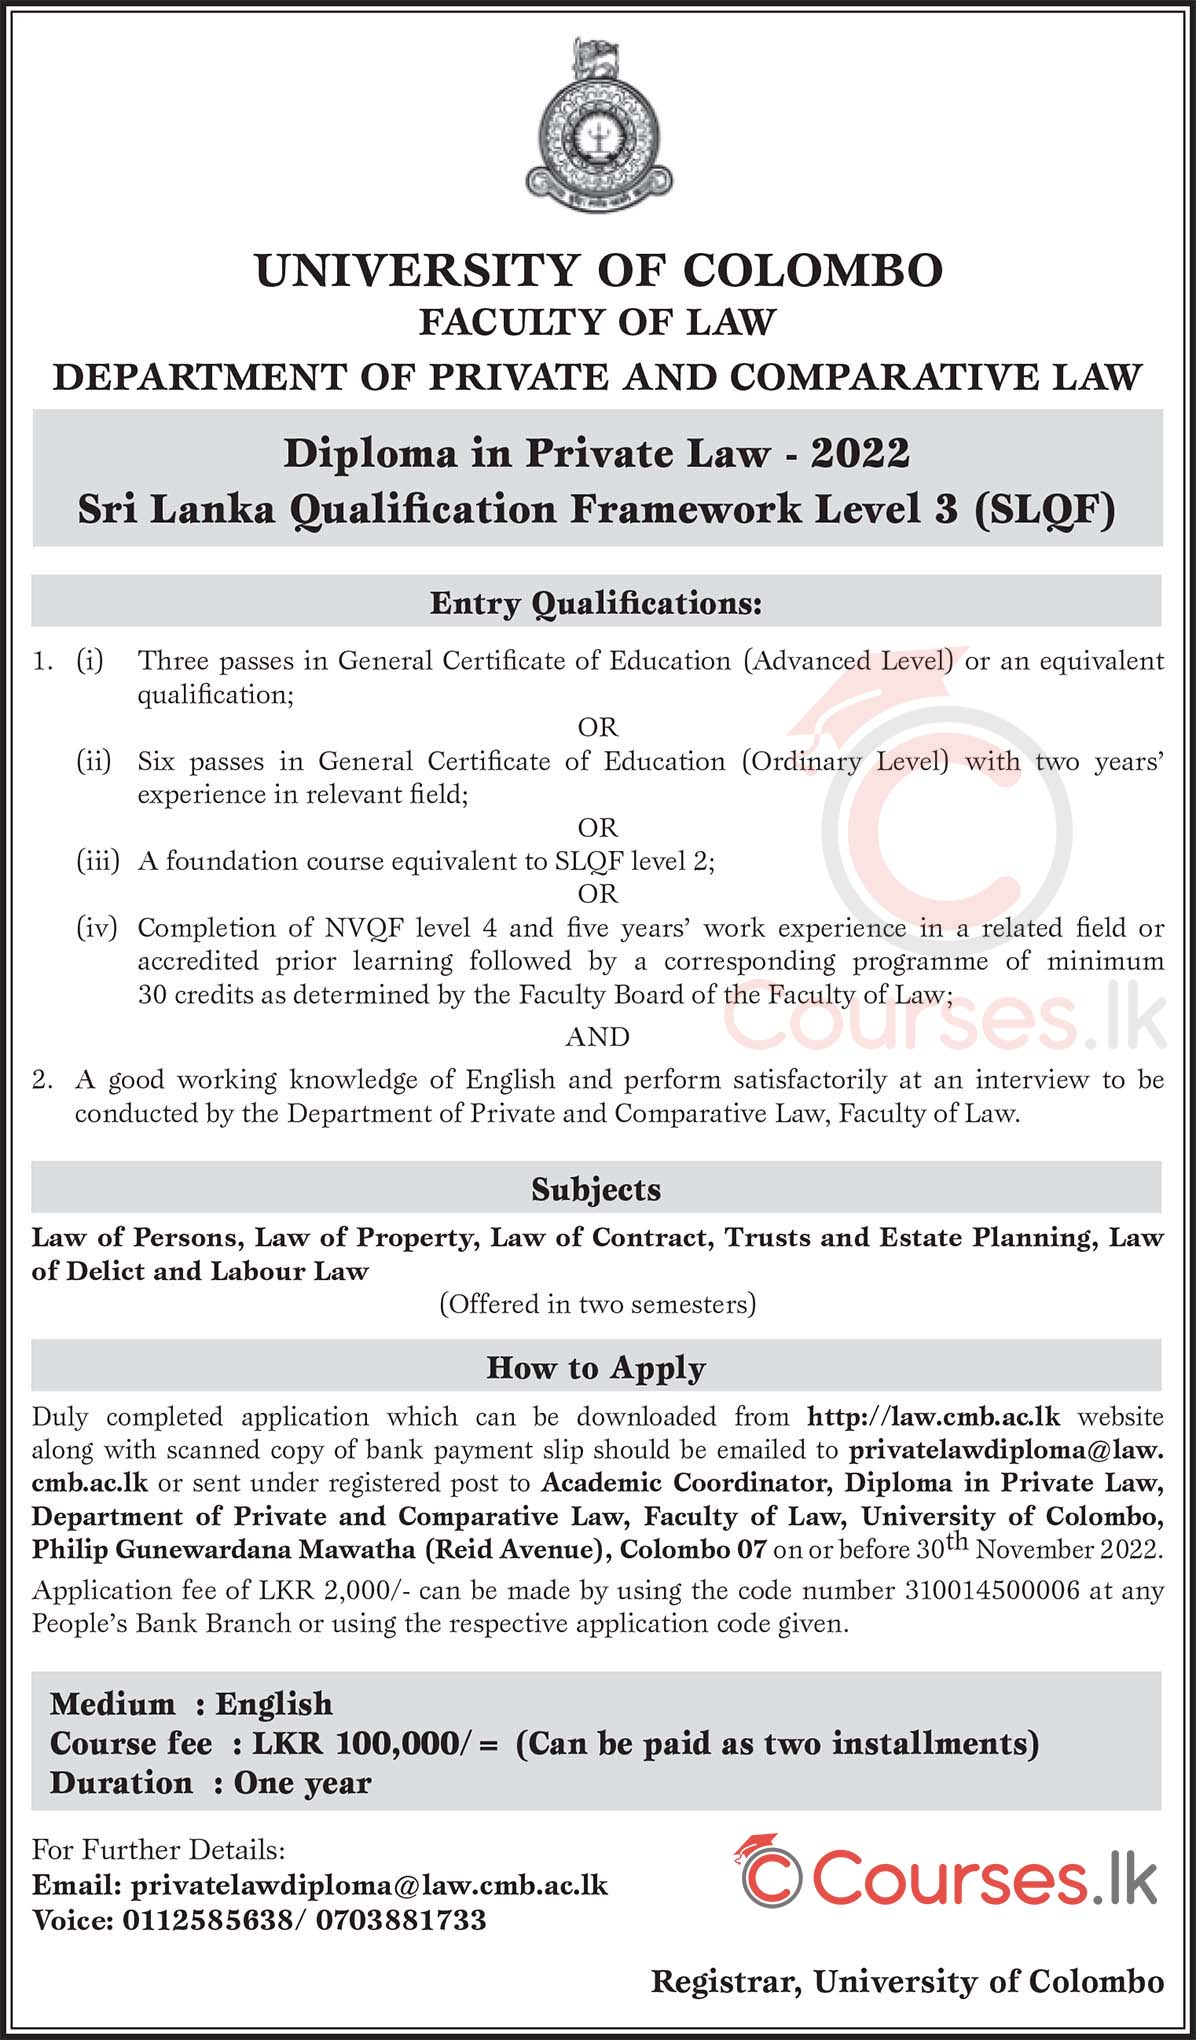 Diploma in Private Law (2022) - University of Colombo